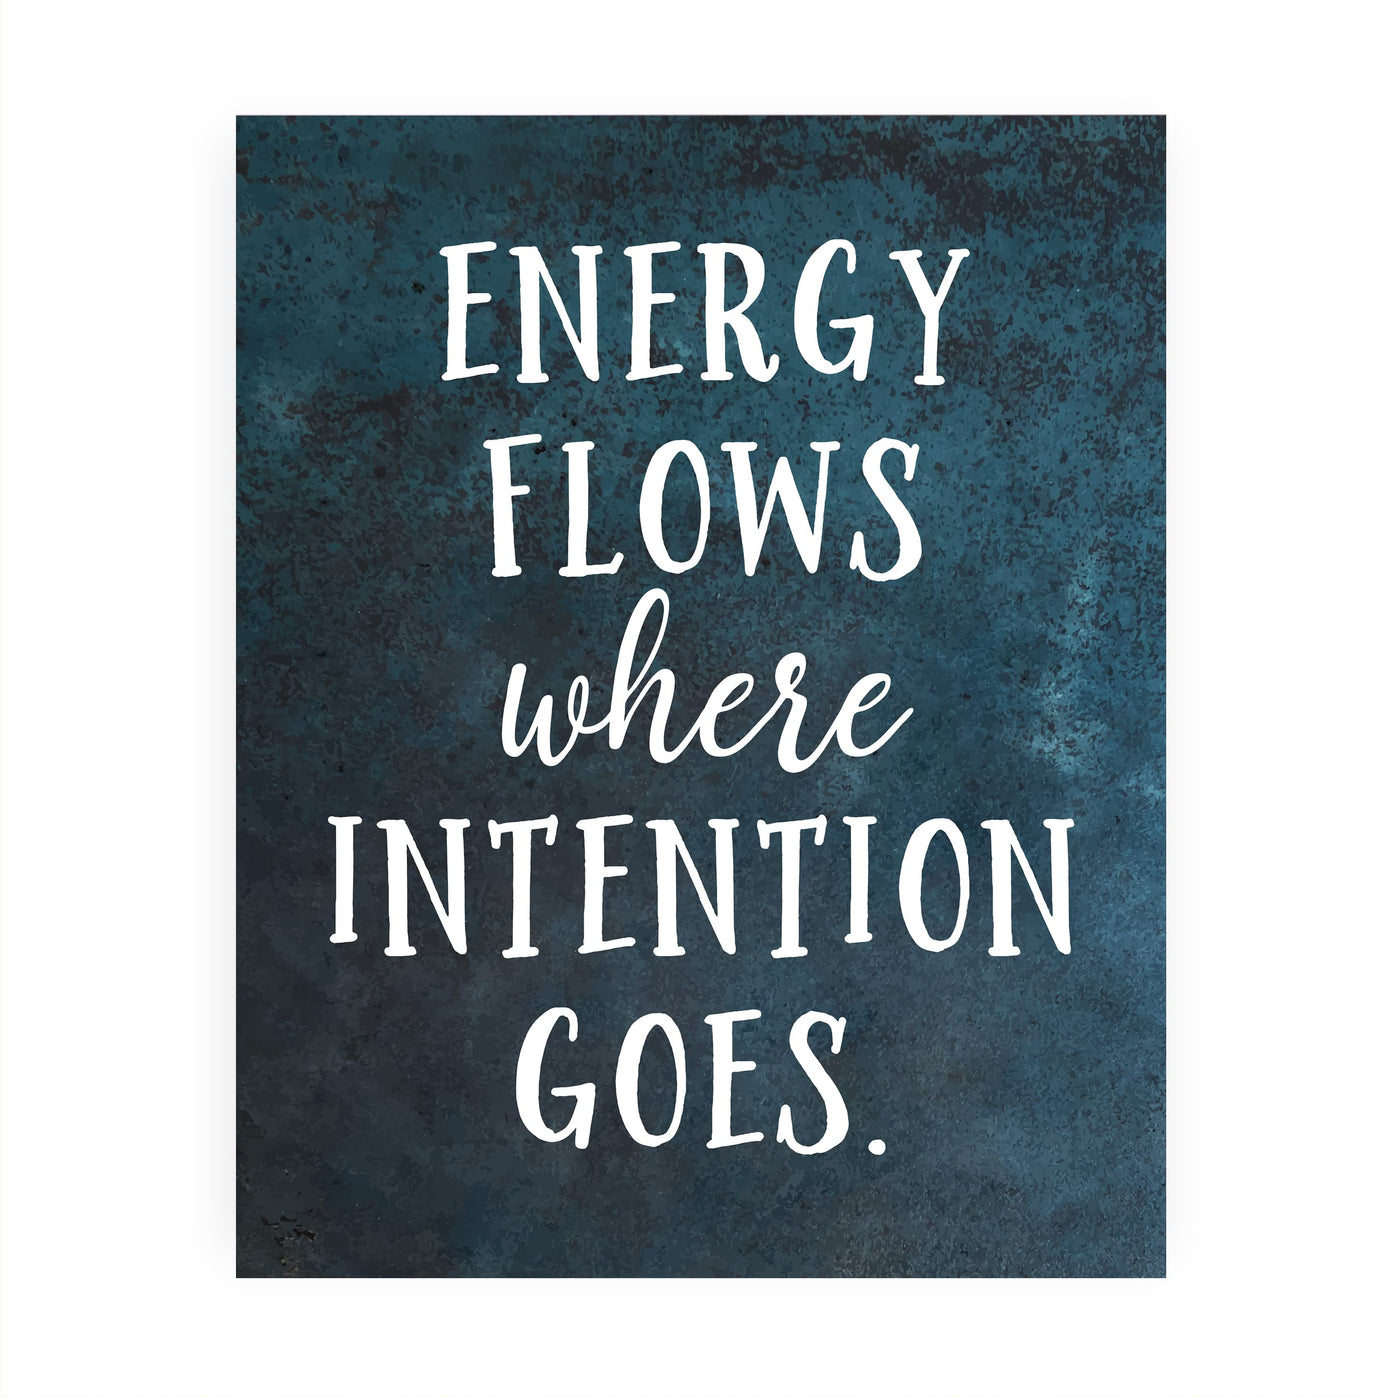 Energy Flows Where Intention Goes Spiritual Quotes Wall Art- 8 x 10" Rustic Typography Design Print-Ready to Frame. Inspirational Home-Studio-Meditation-Zen Decor! Great Positive Decoration for All!